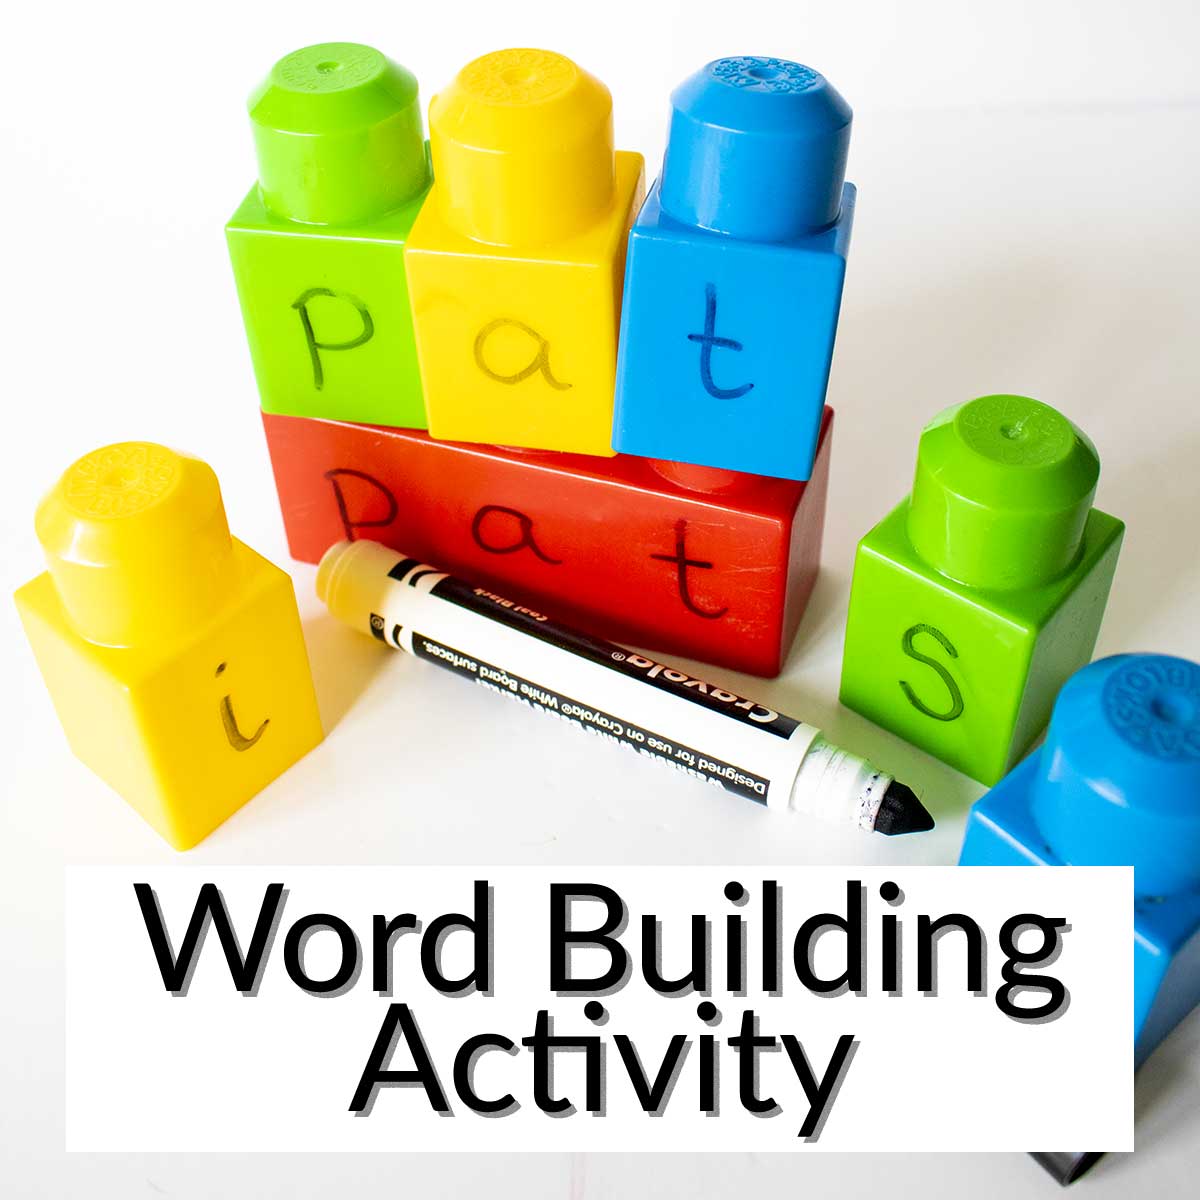 Colourful building blocks used to build 3 letter words with kids. Text overlay reads "Word Building Activity"